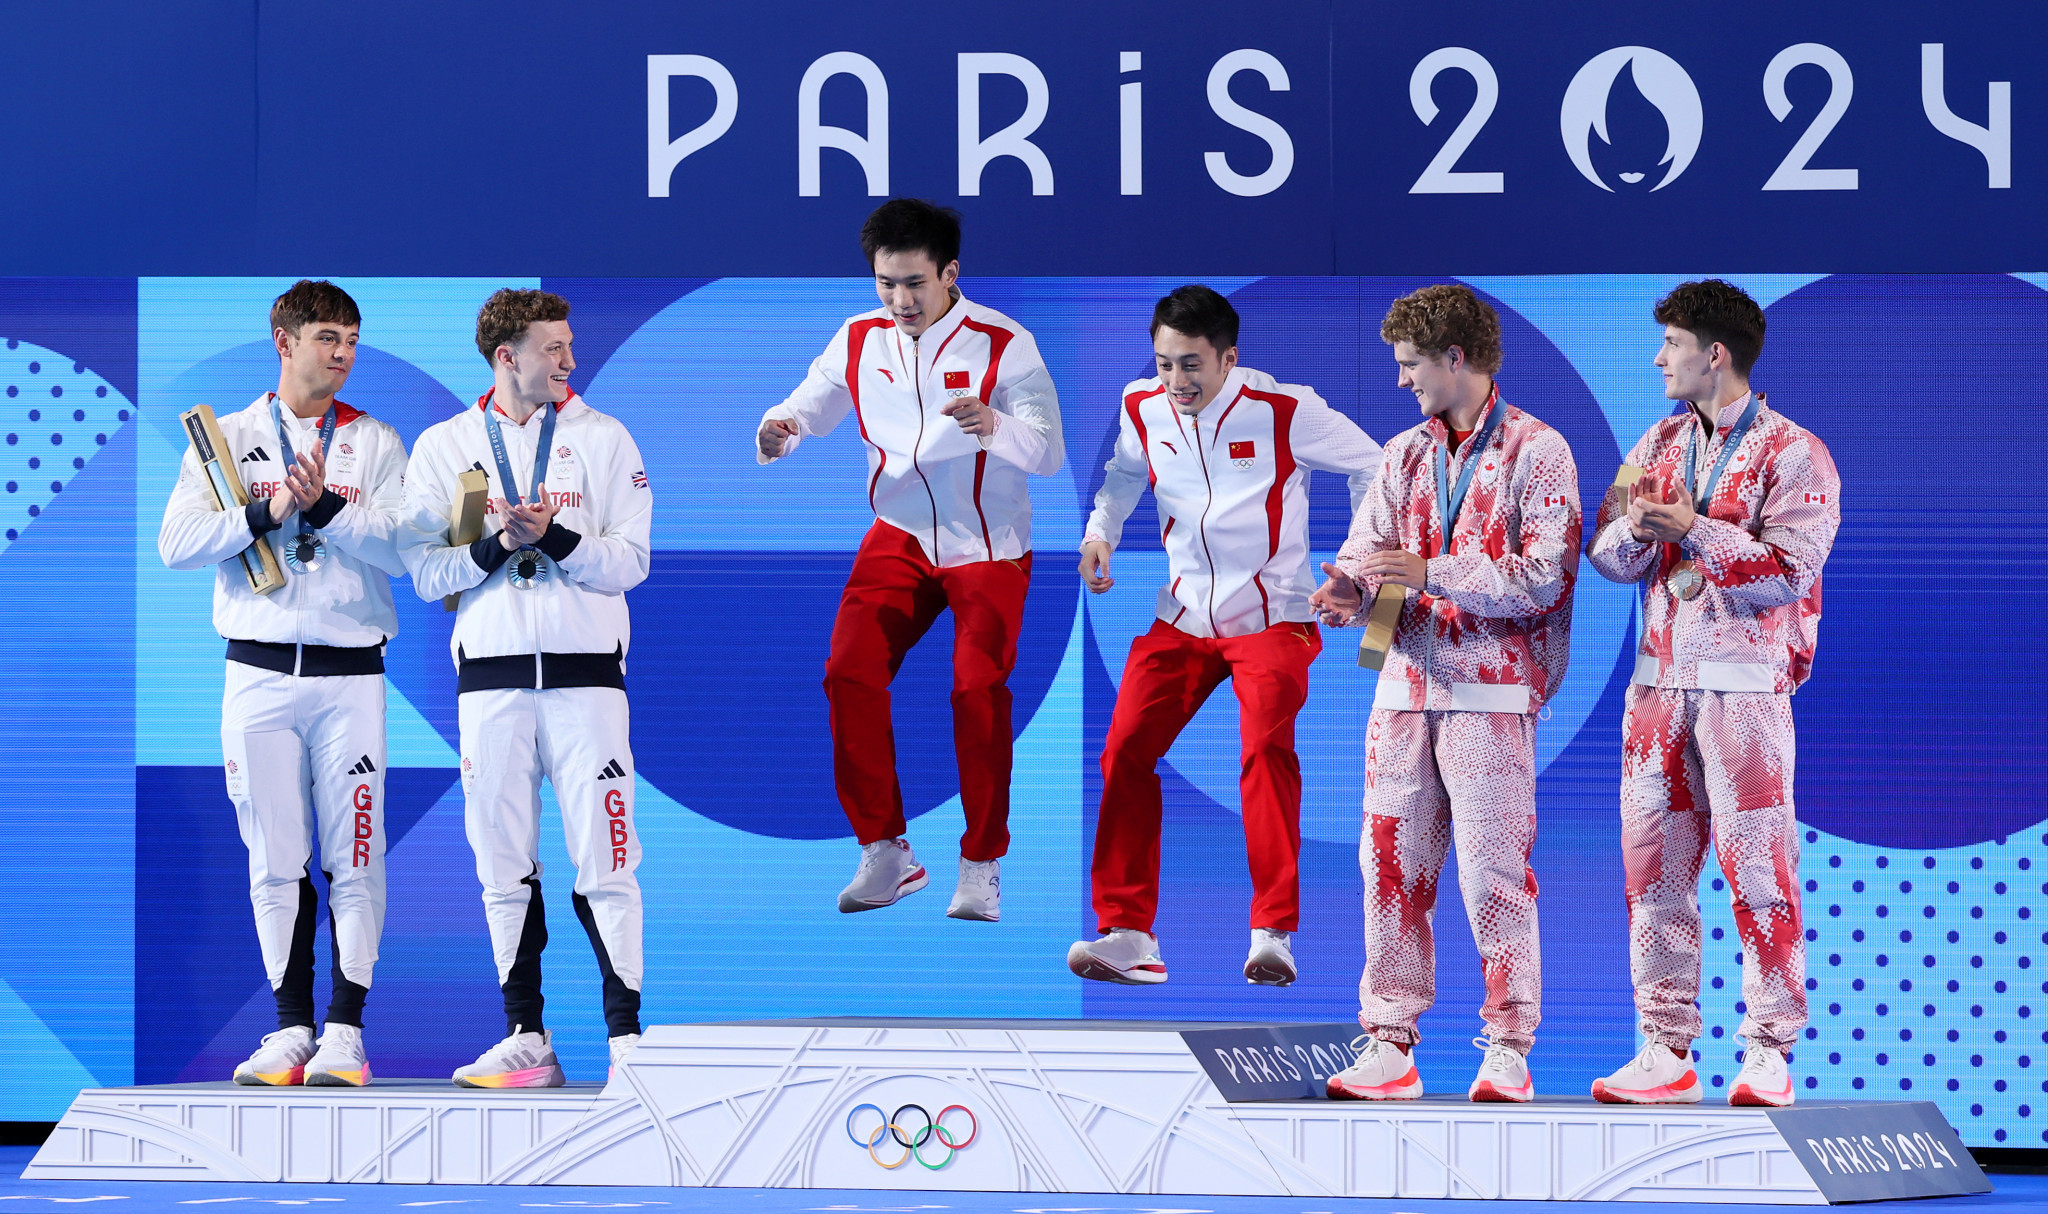 Gold Medalists Lian Junjie and Yang Hao of Team People's Republic of China on the podium alongside Silver Medalists Thomas Daley and Noah Williams of Team Great Britain and Bronze Medalists Rylan Wiens and Nathan Zsombor-Murray of Team Canada. GETTY IMAGES